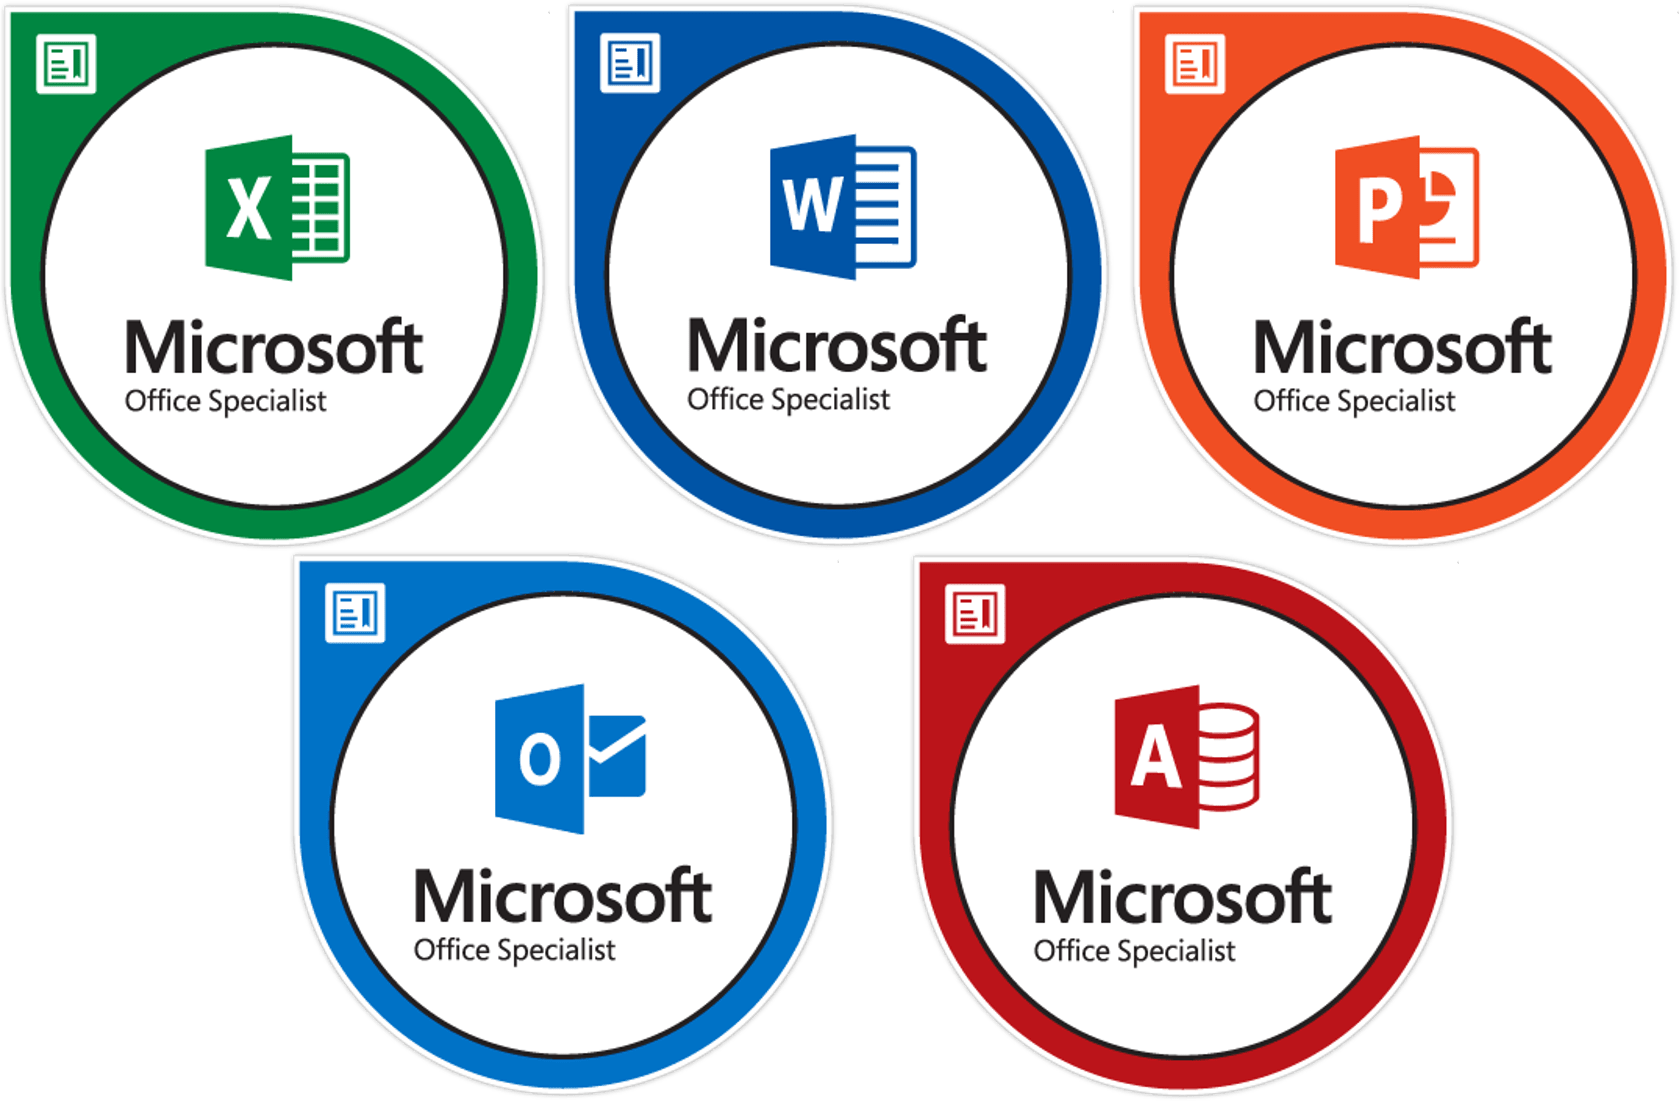 MO-201 – Microsoft Excel Expert (Excel and Excel 2019)